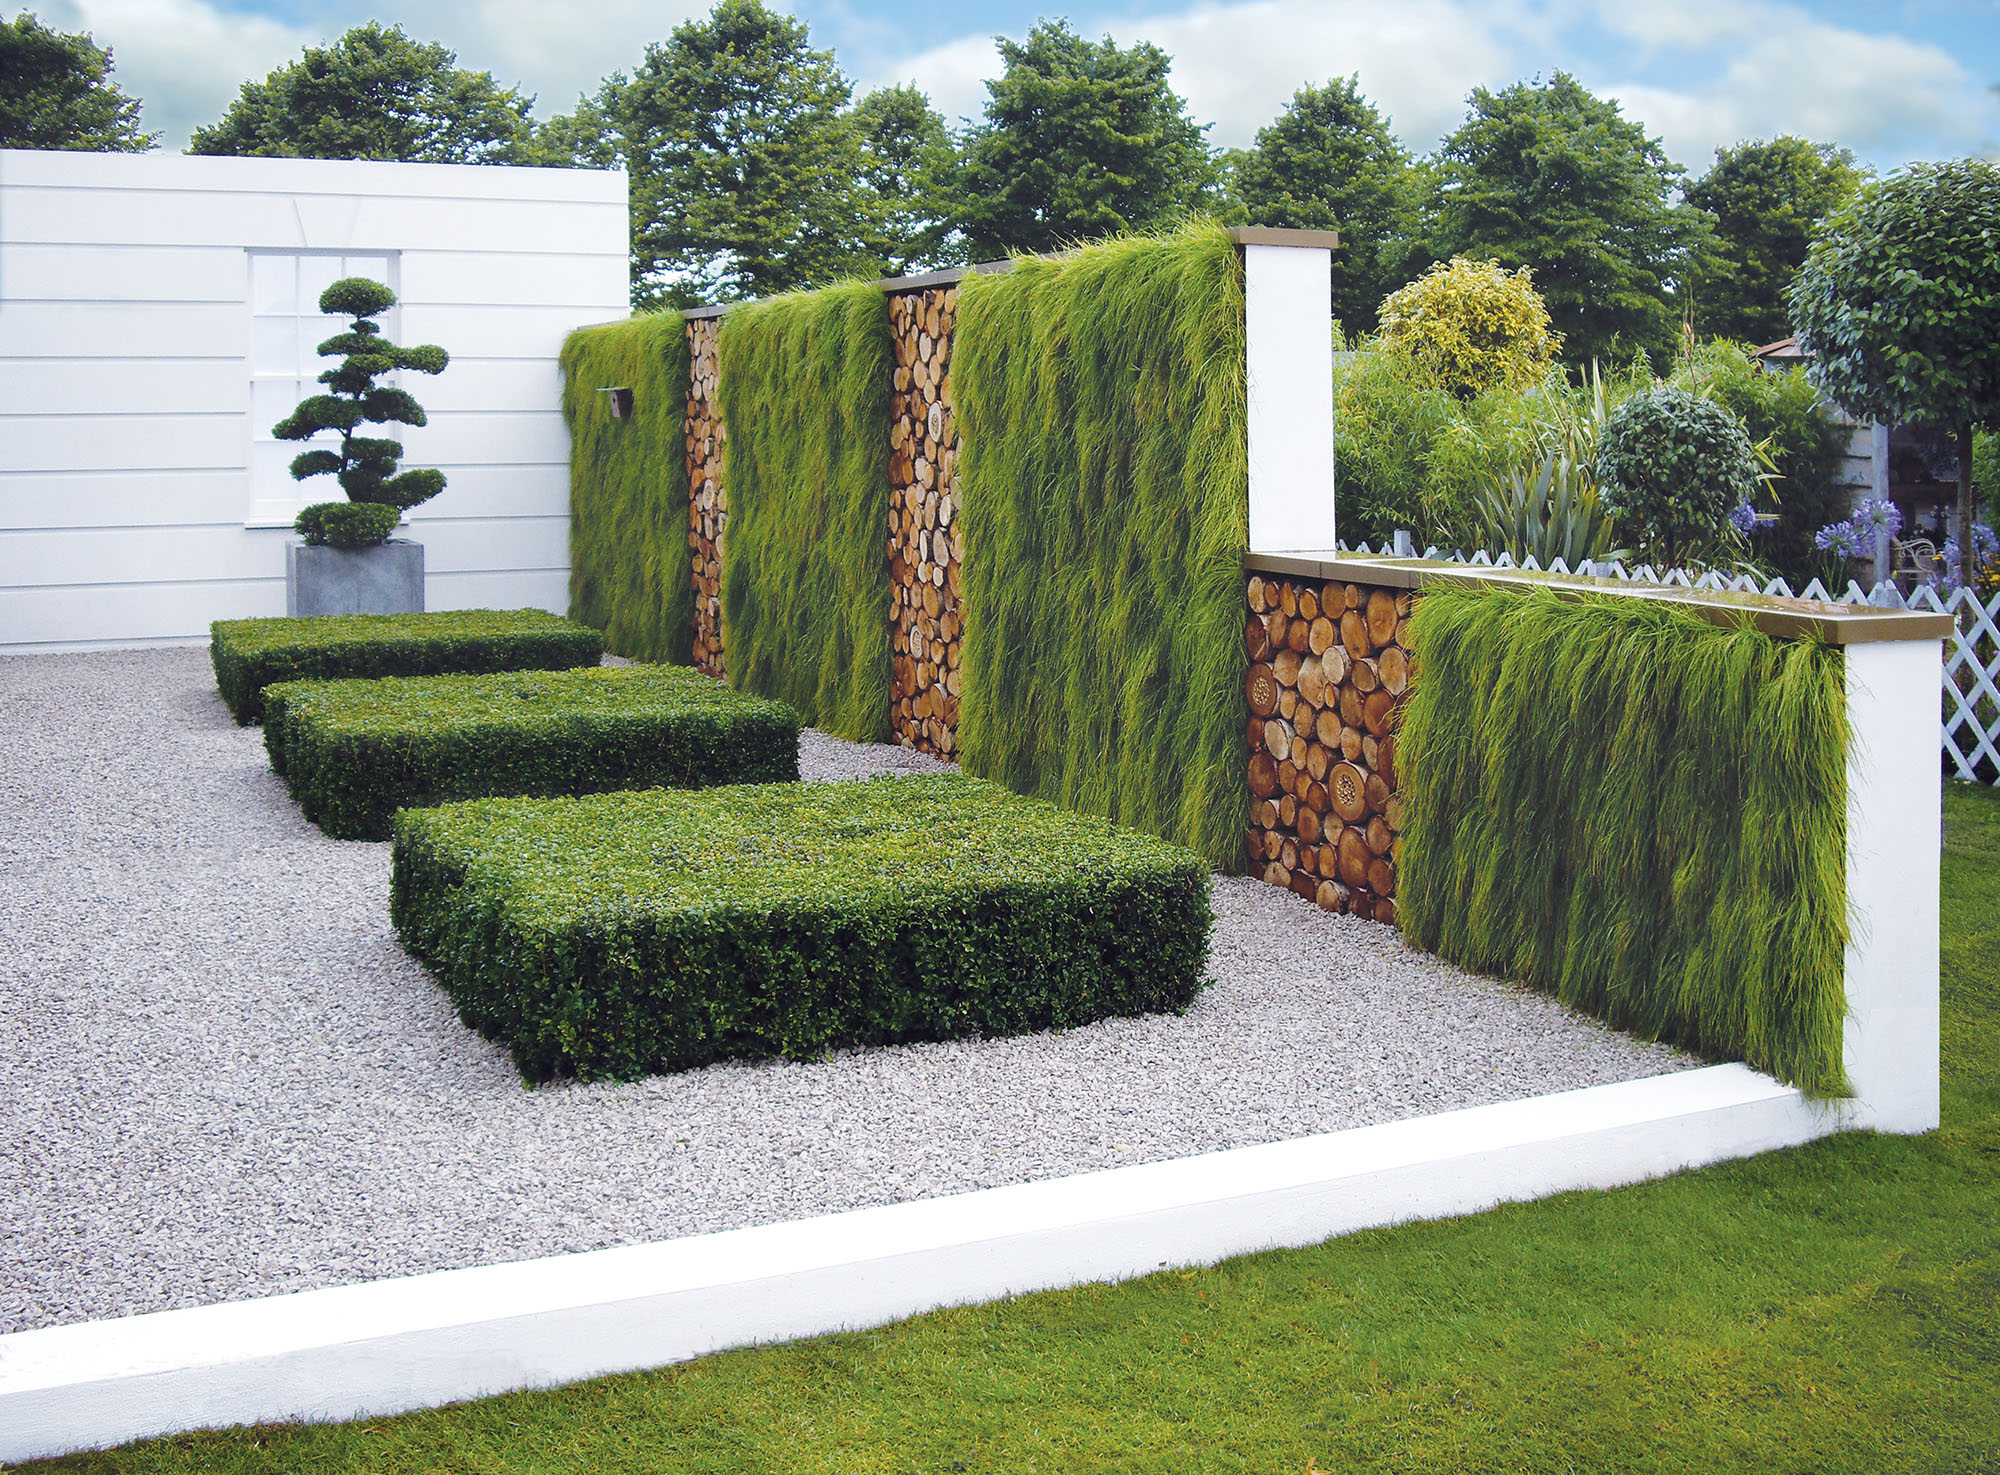 Living Walls and Shrubs at Chelsea Flower Show